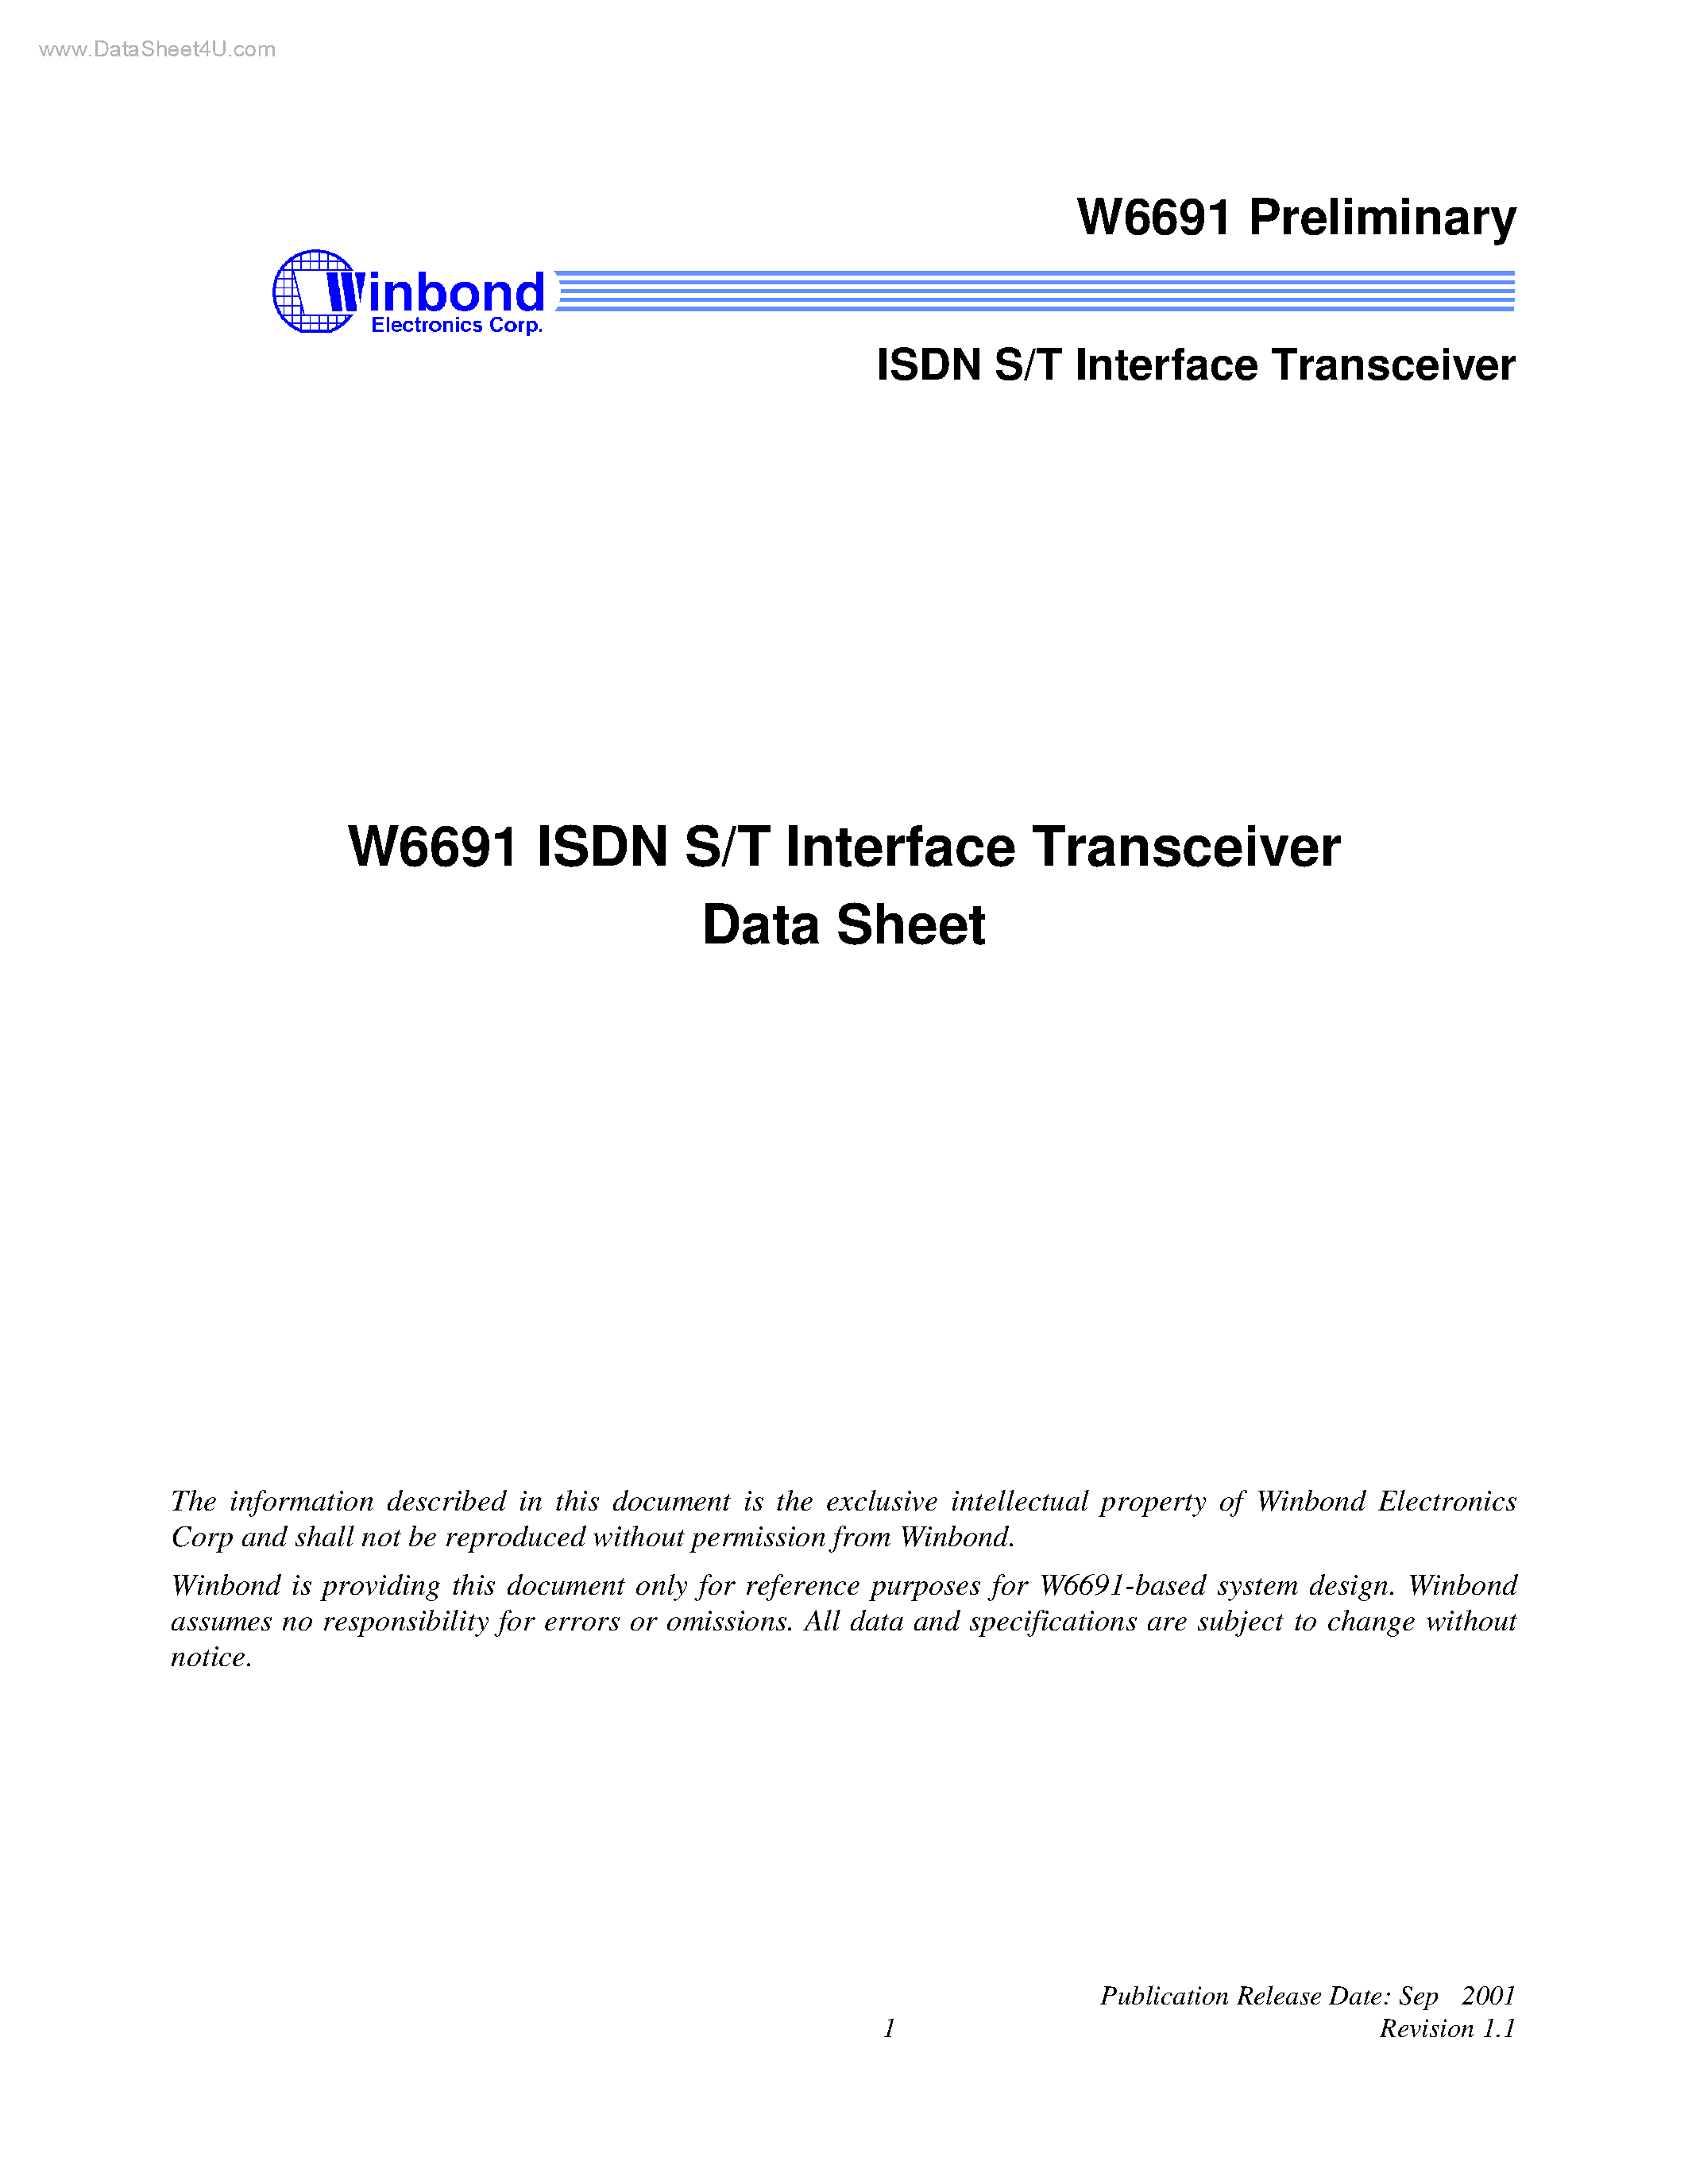 Даташит W6691 - ISDN S/T Interface Transceiver страница 1